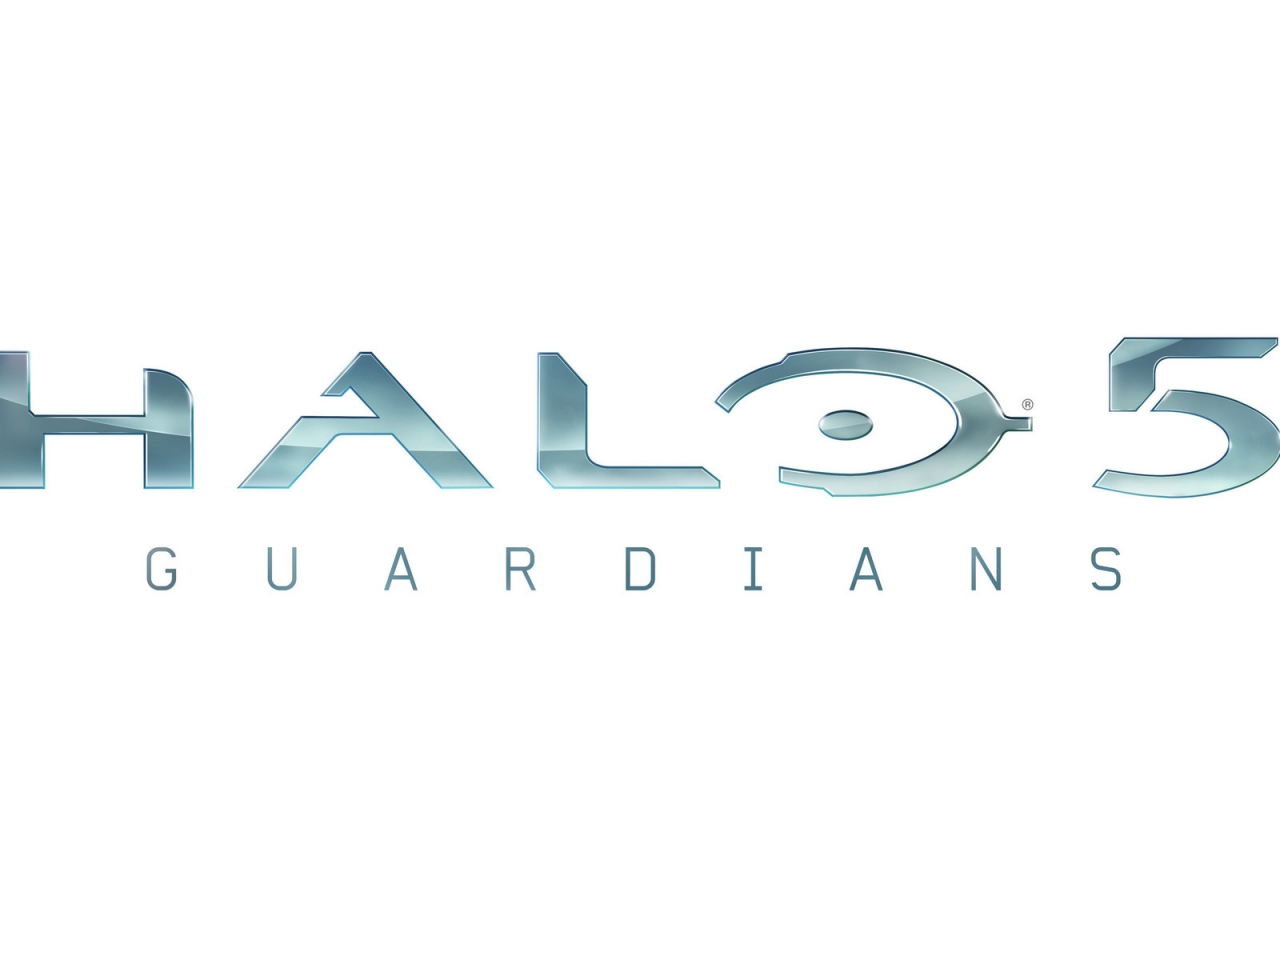 Halo 5 Guardians Logo for 1280 x 960 resolution